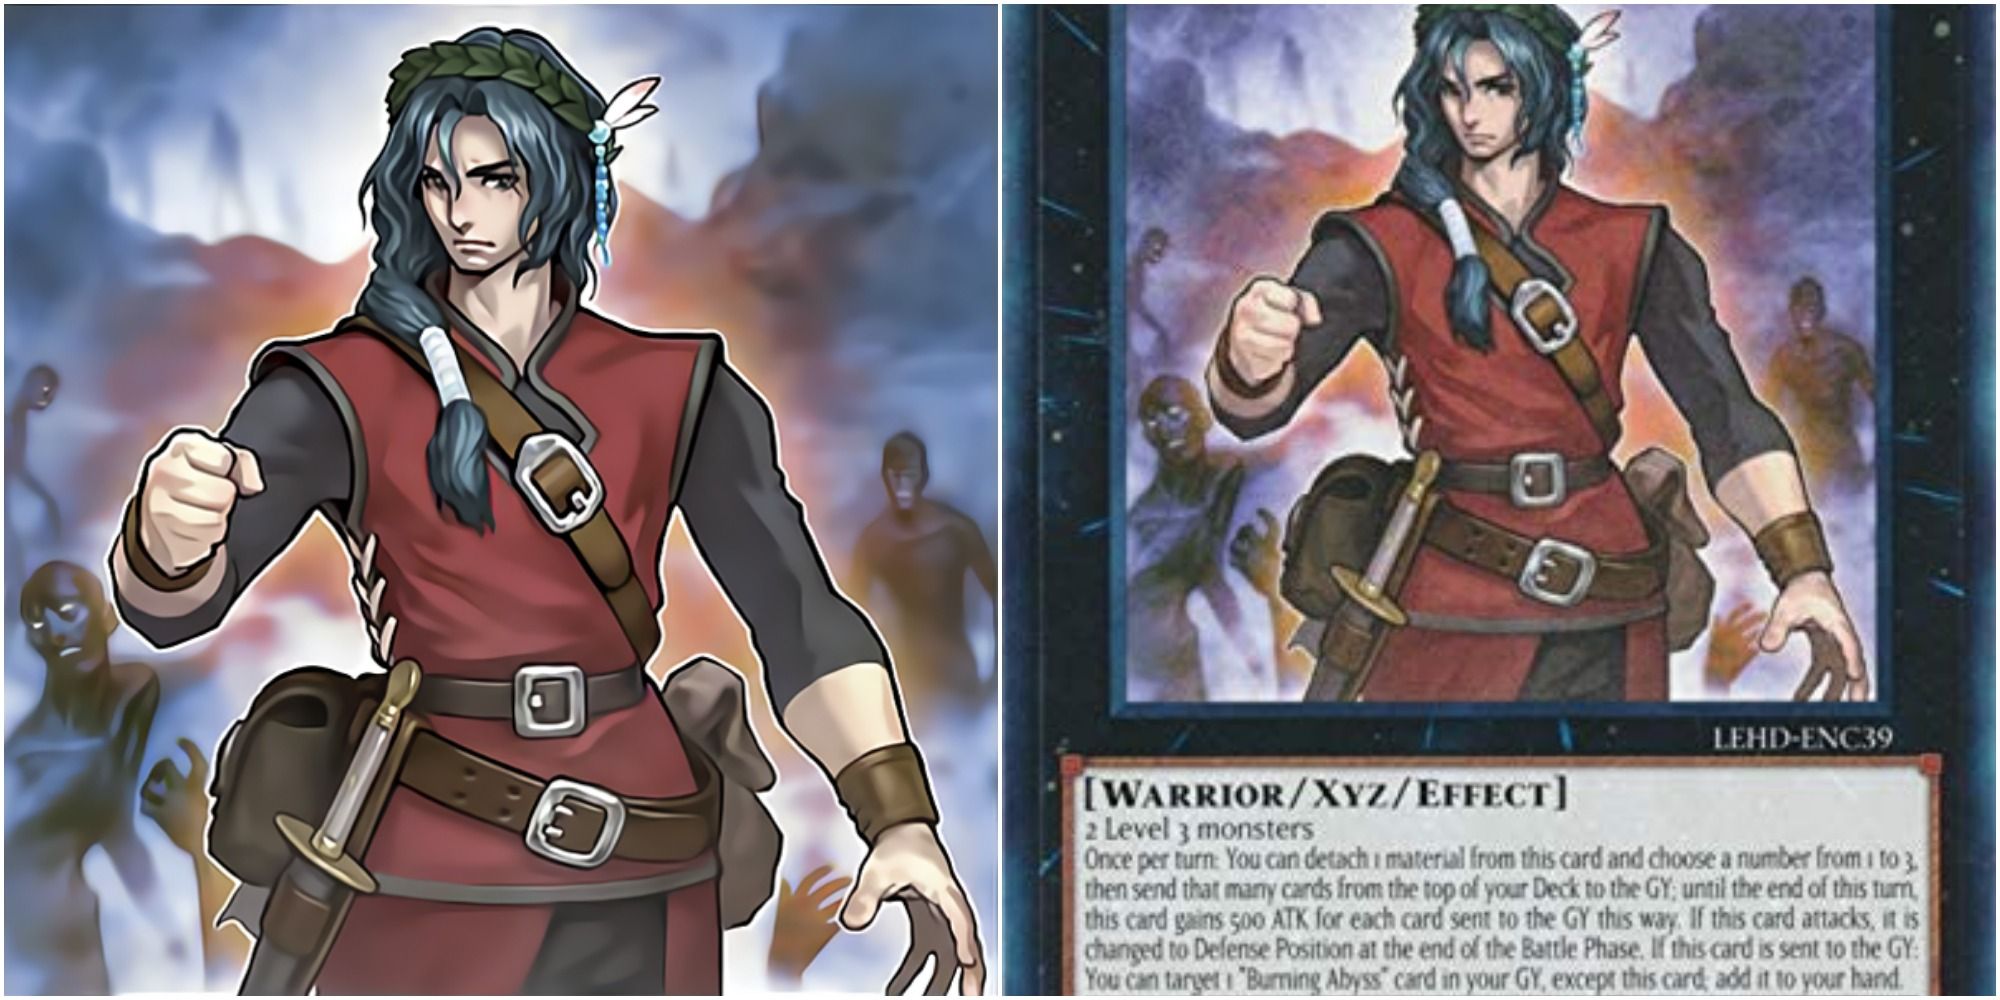 yugioh dante traveler of the burning abyss card art and text